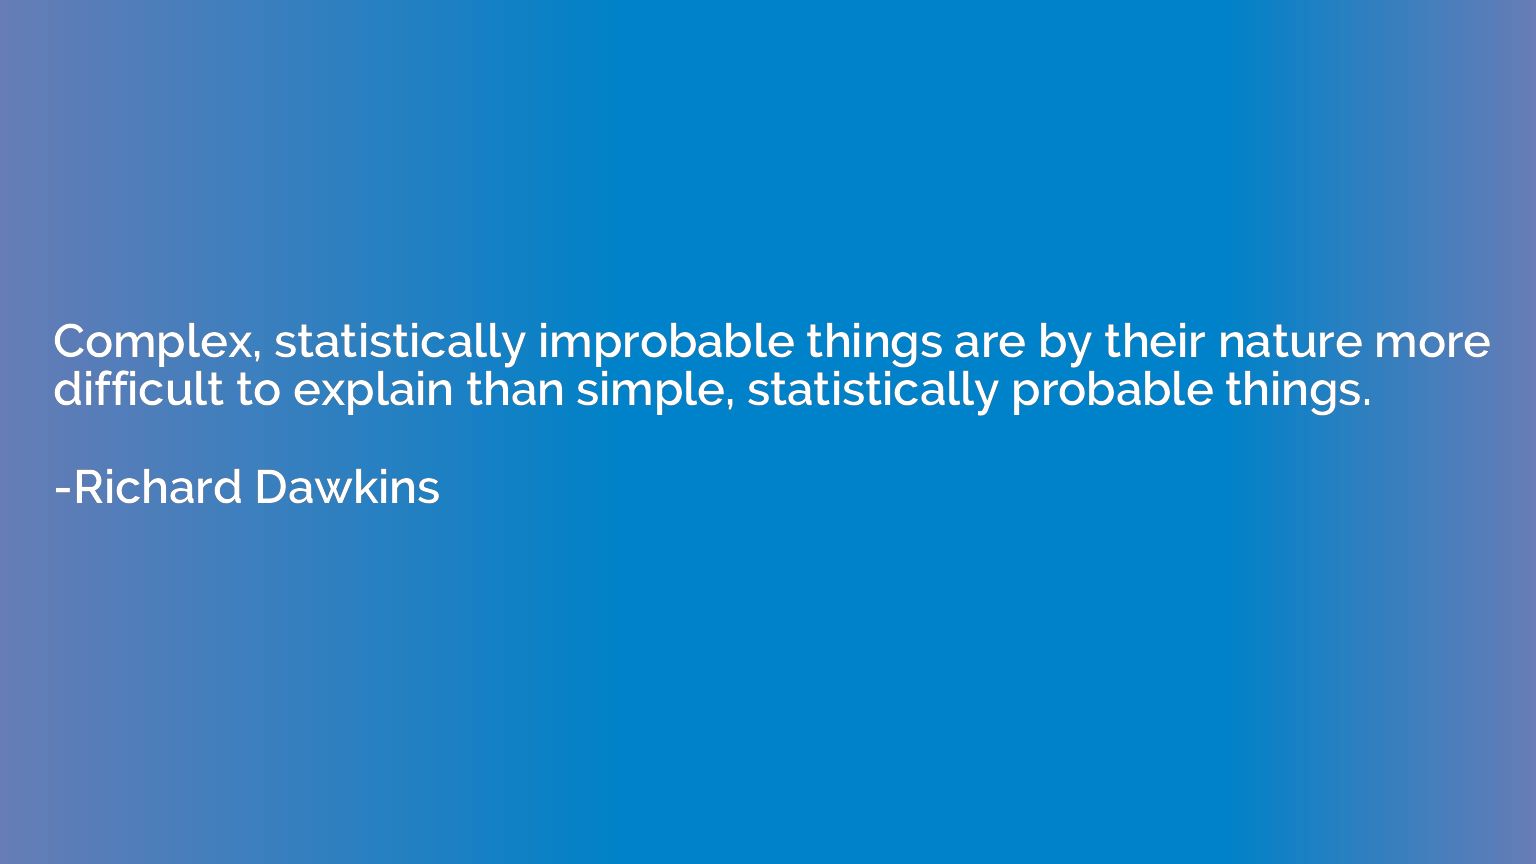 Complex, statistically improbable things are by their nature